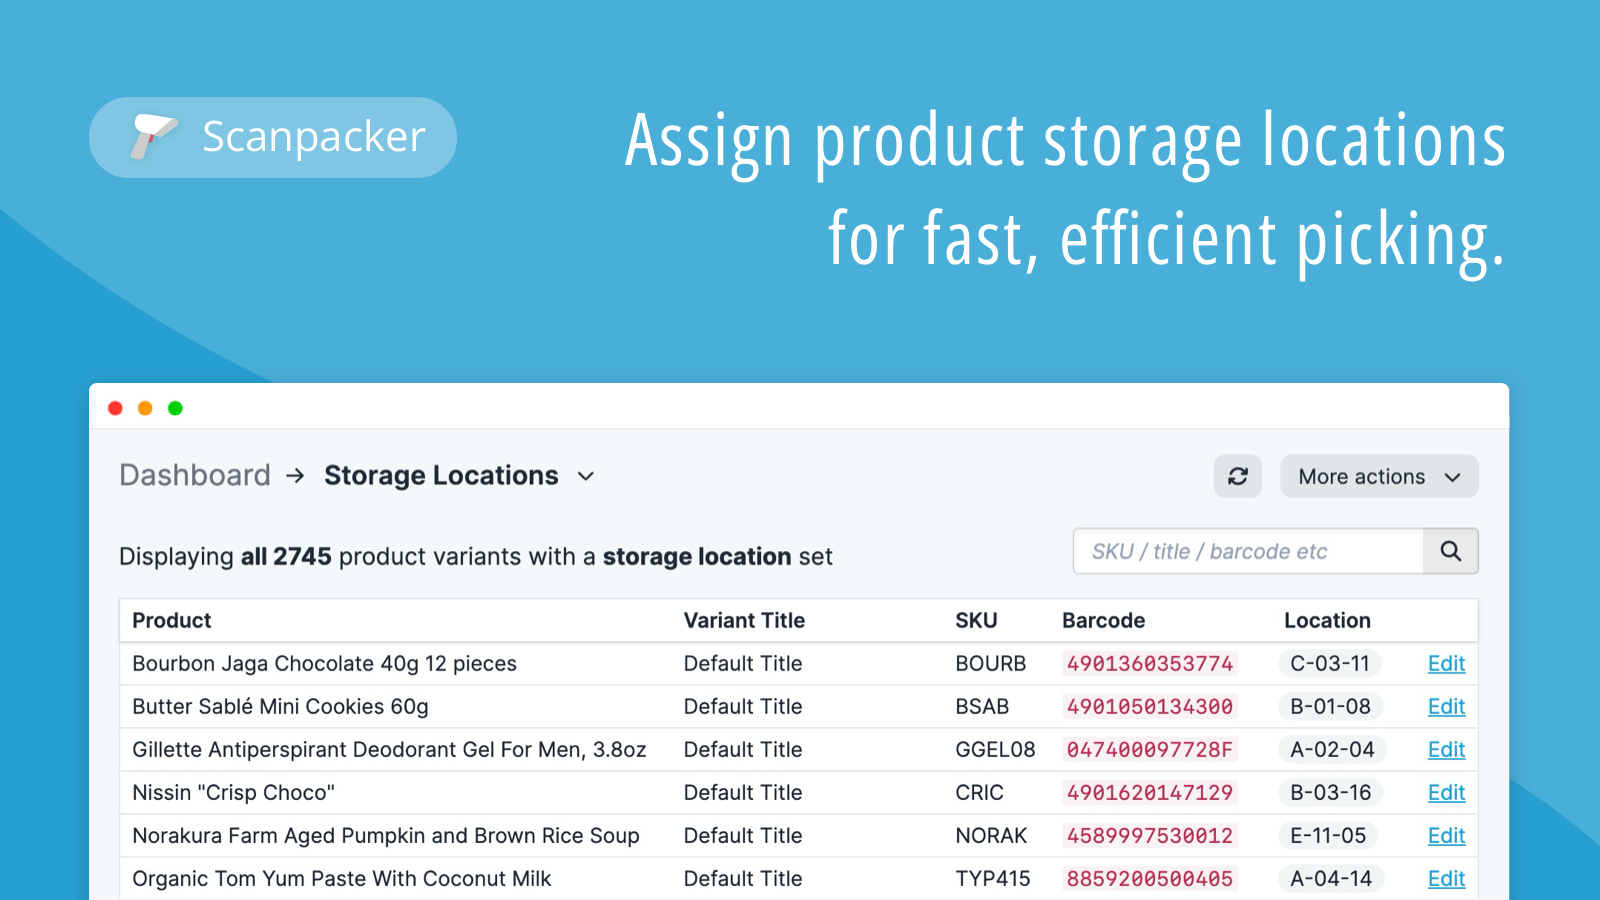 Assign product storage locations for fast, efficient picking